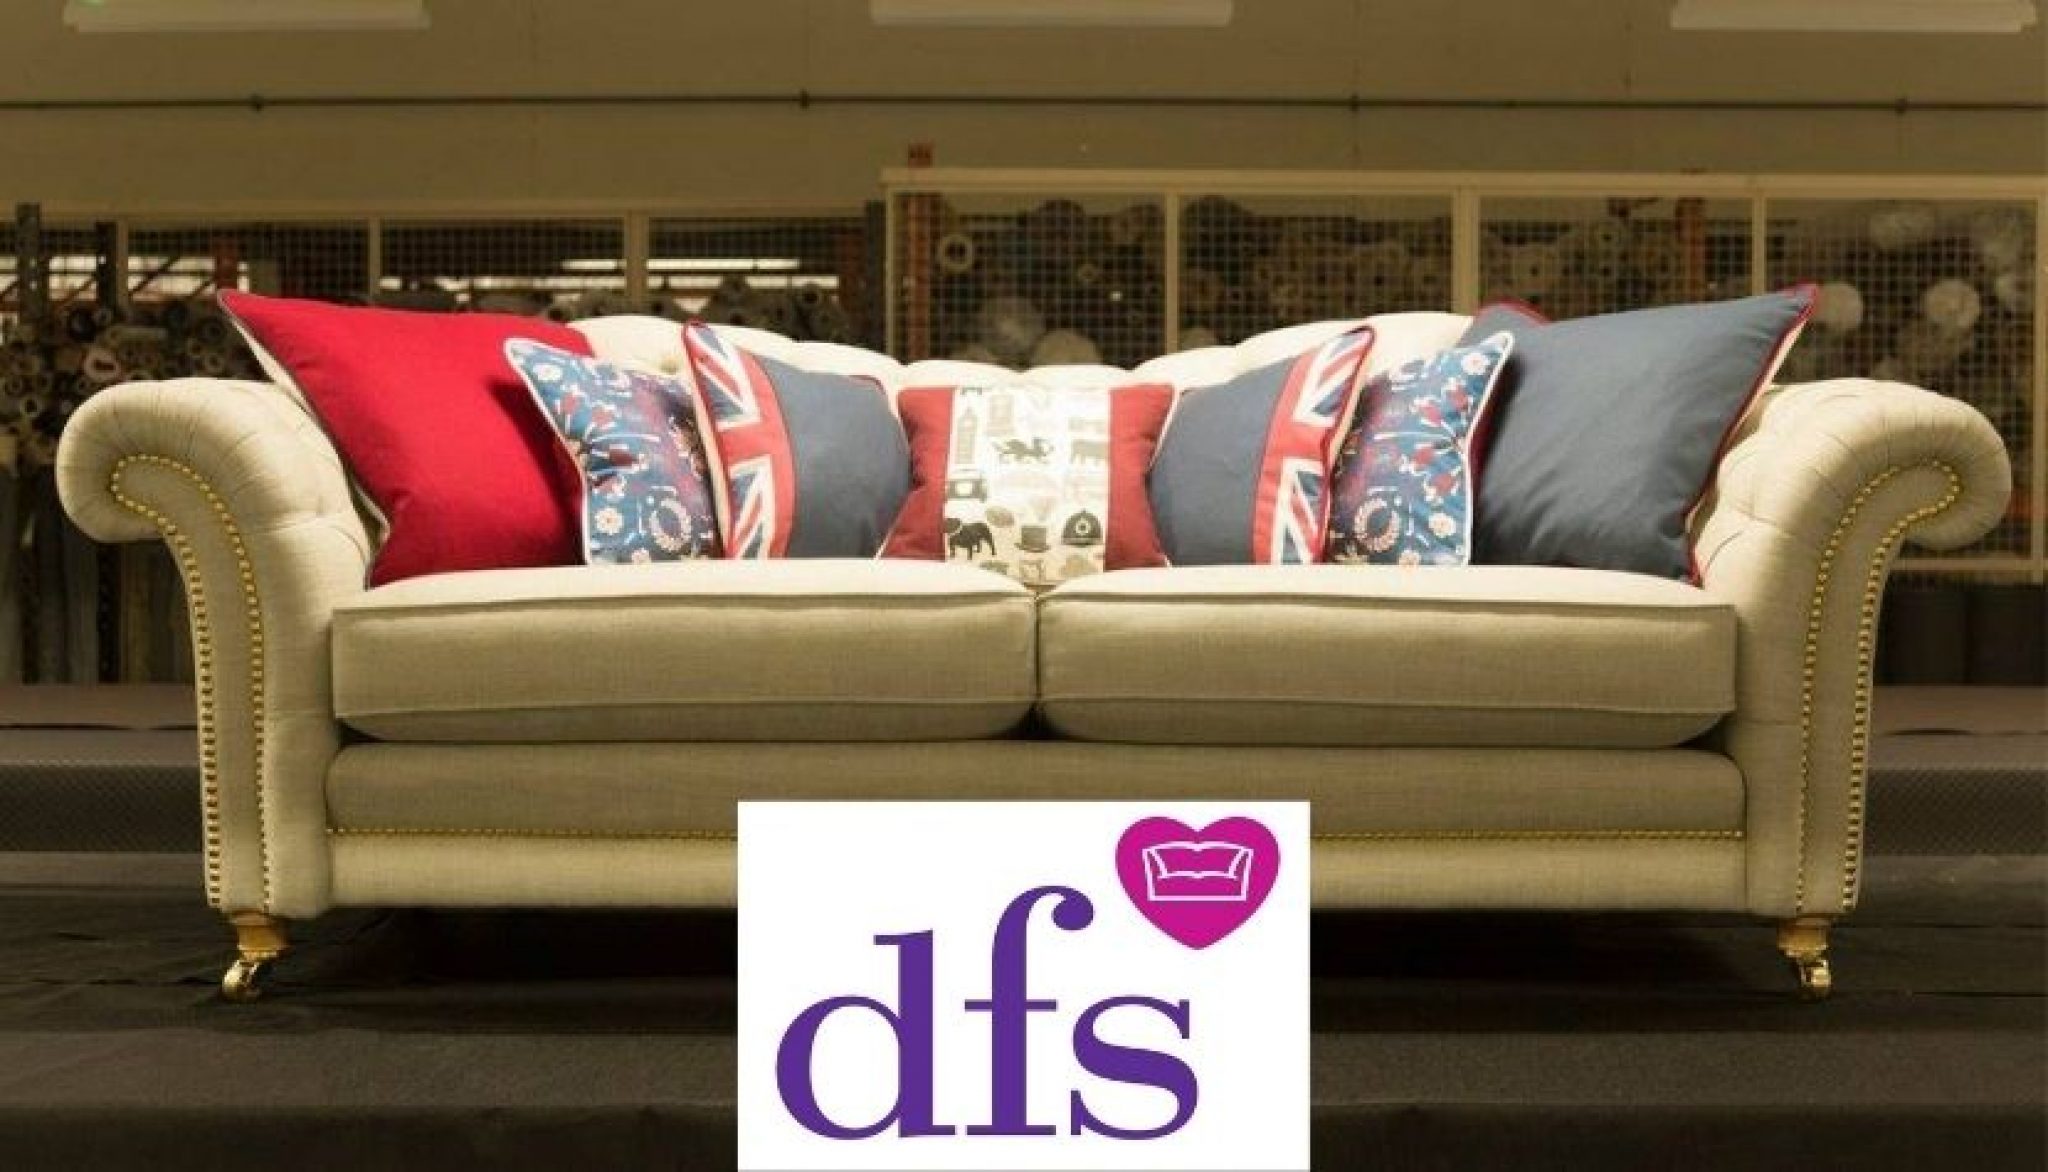 dfs-is-there-an-nhs-discount-code-to-use-nhs-discount-offers